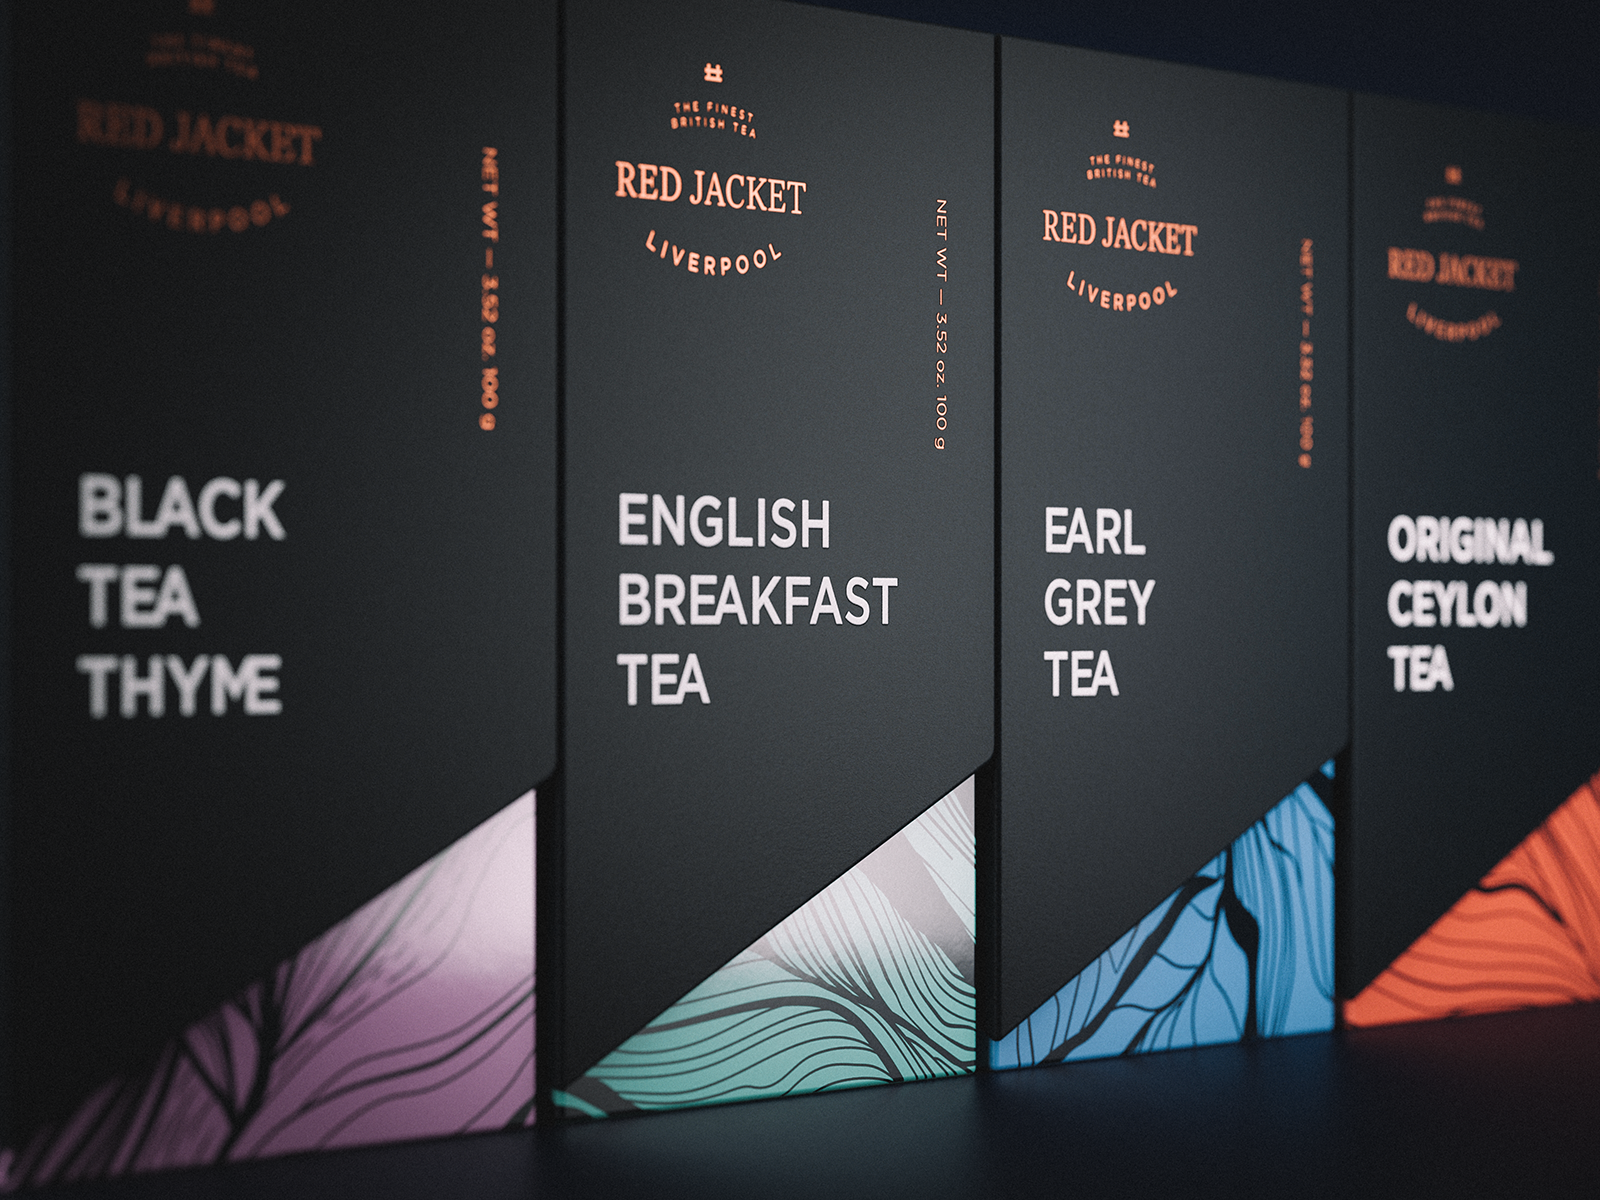 New Tea Brand from Created from Scratch for the Russian Tea Market